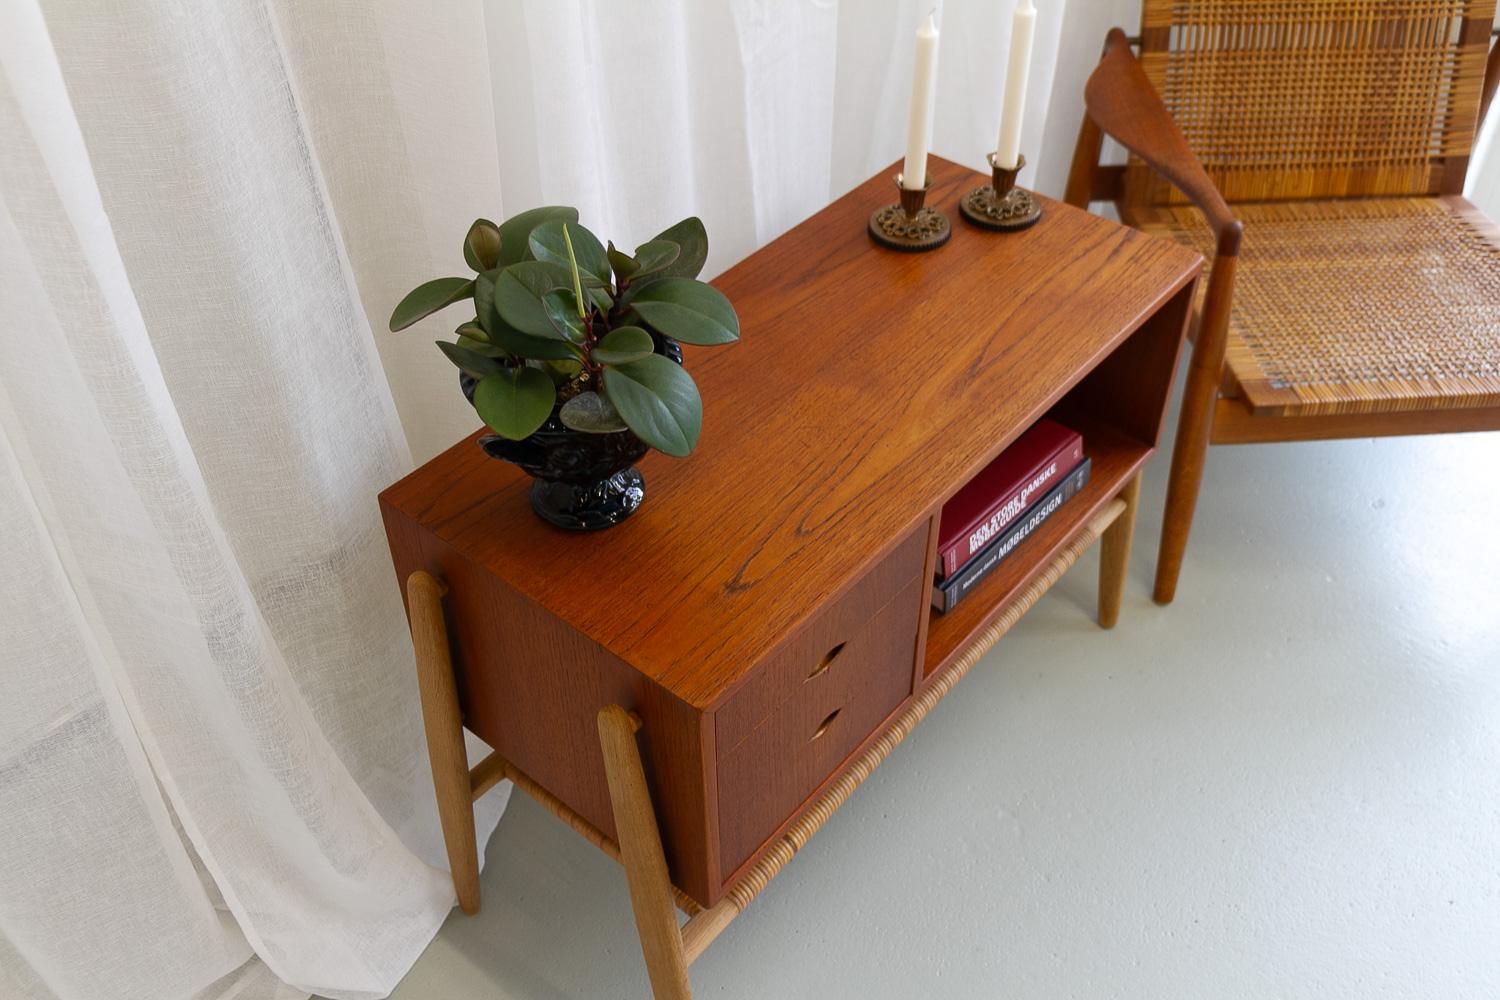 Danish Modern Teak and Oak Console Table with Cane Shelf, 1960s For Sale 14